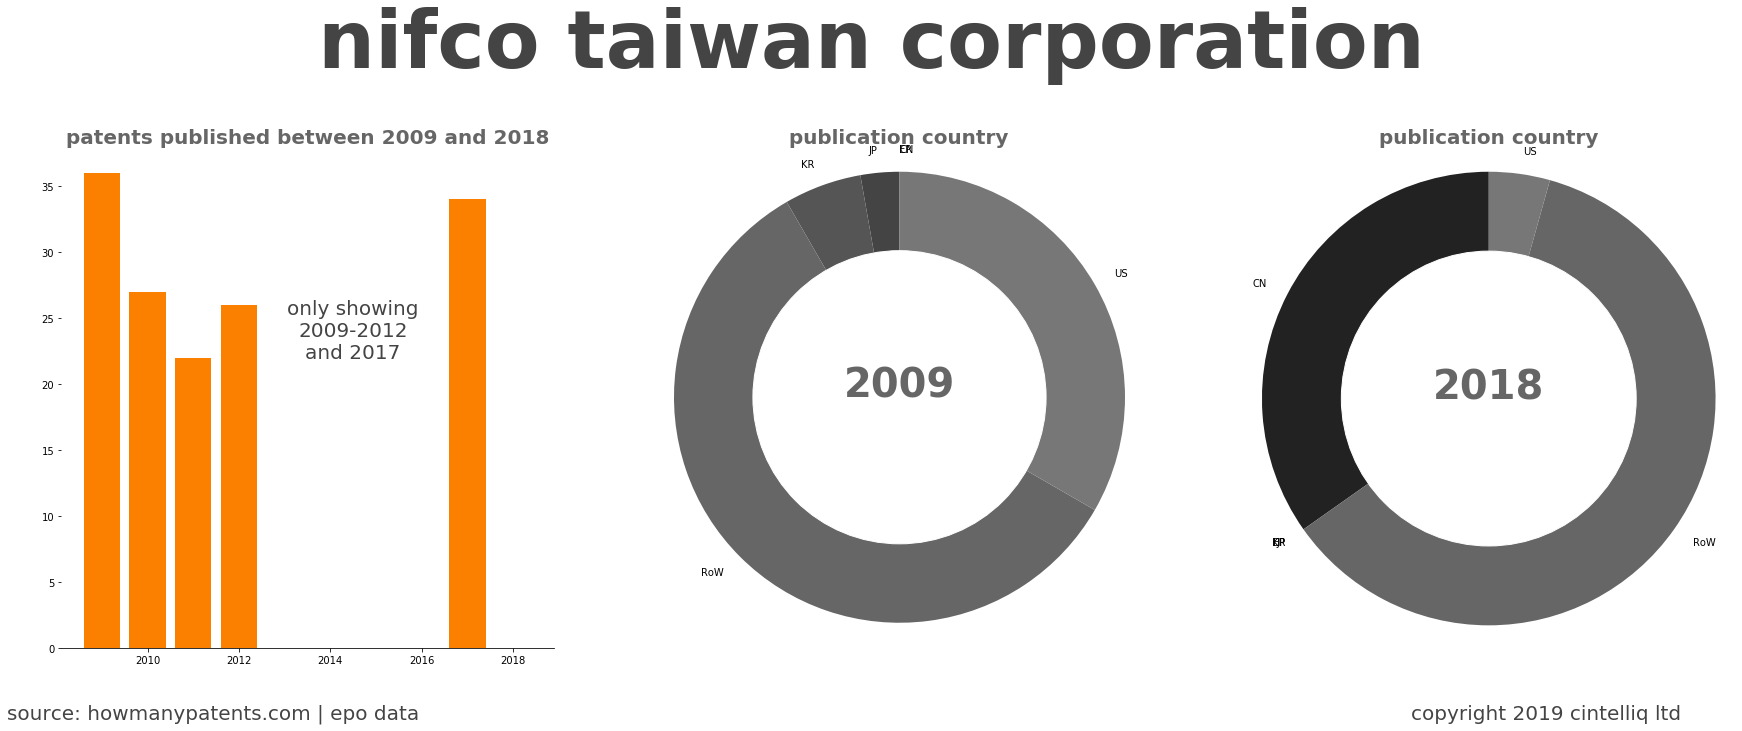 summary of patents for Nifco Taiwan Corporation